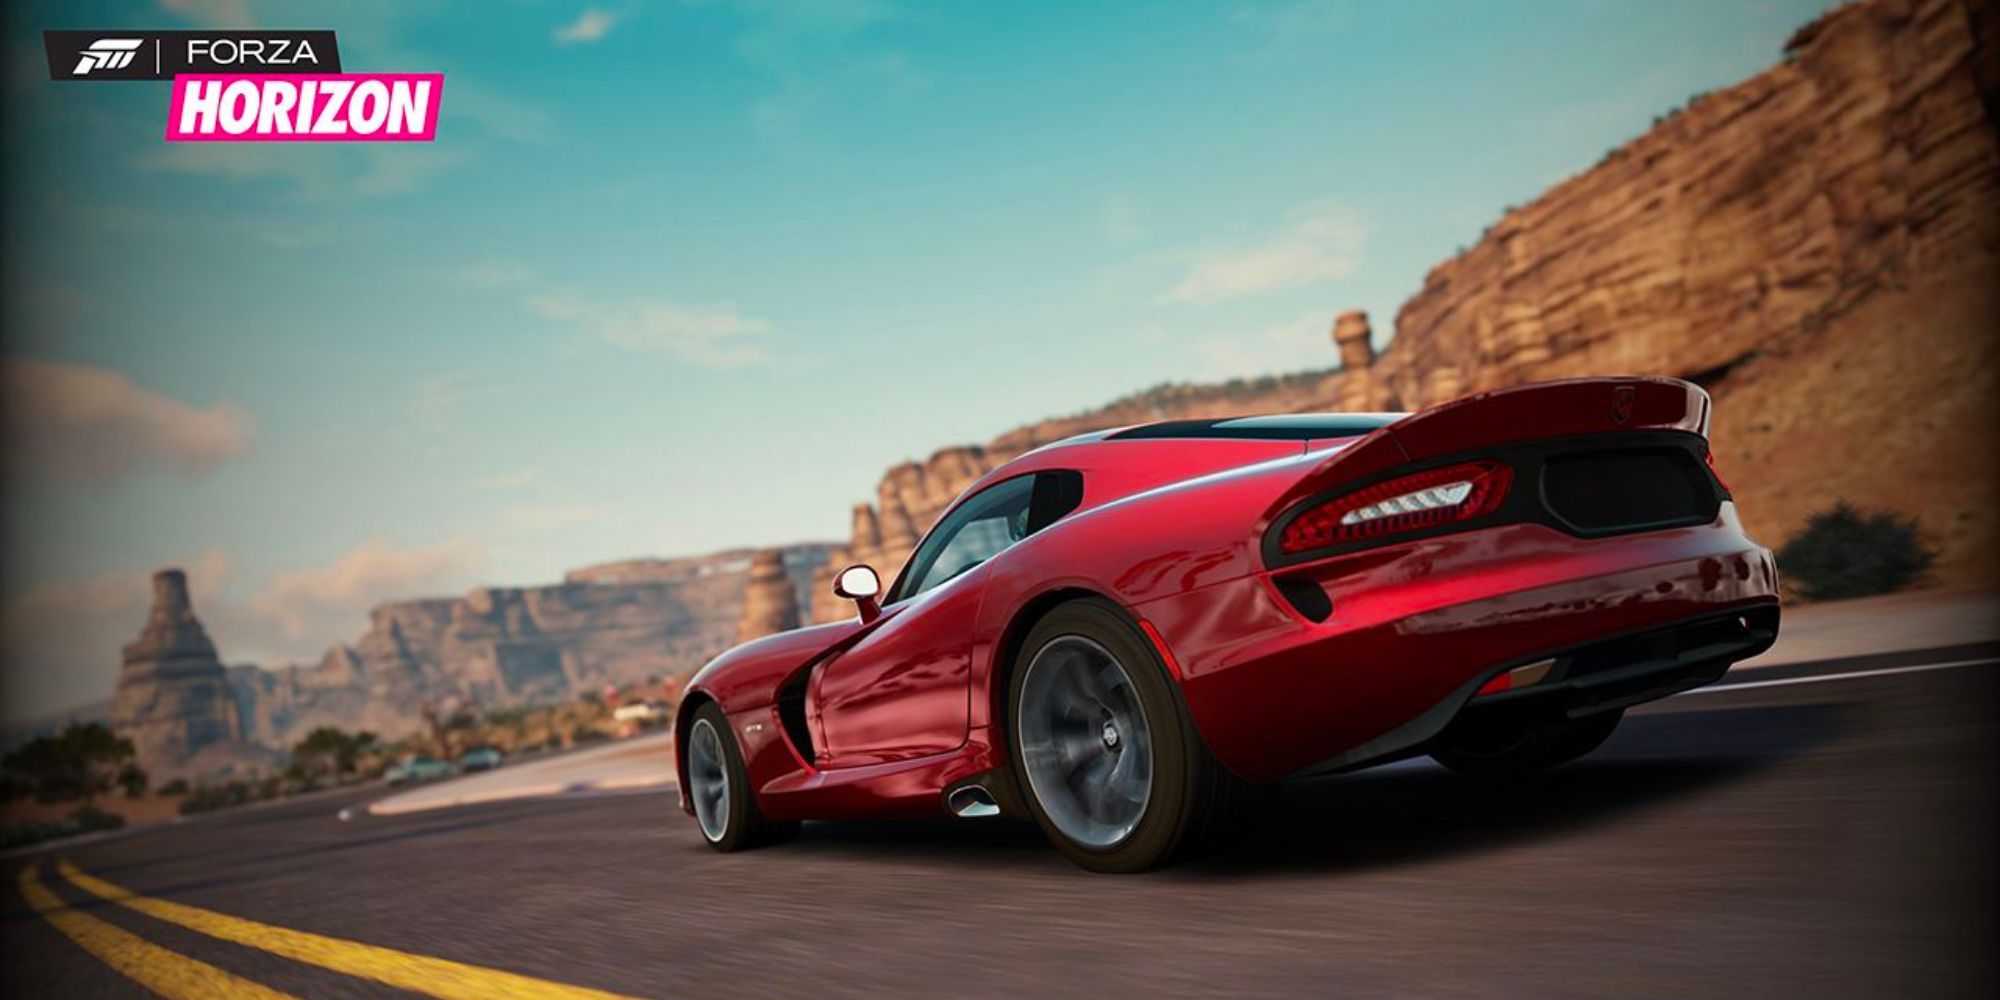 Forza Horizon Red Car on the Road